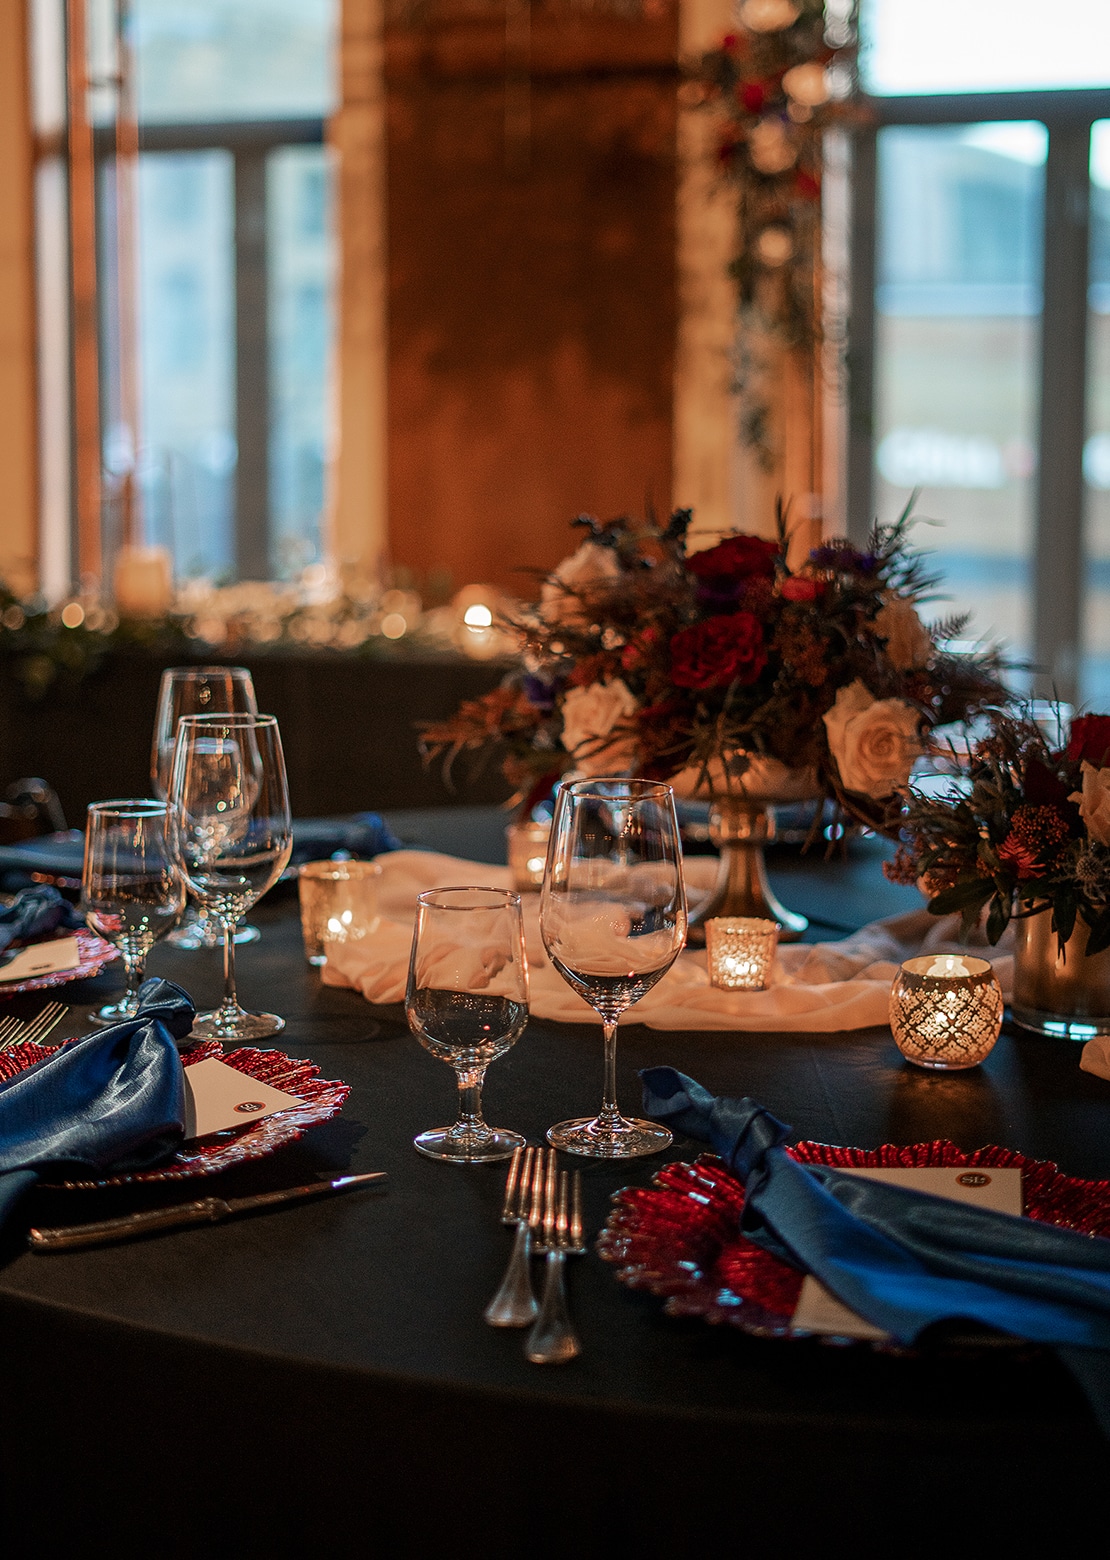 A table set awaiting the start of an event, decorated with red charger plates, blue napkins, candles, and a bouquet of roses